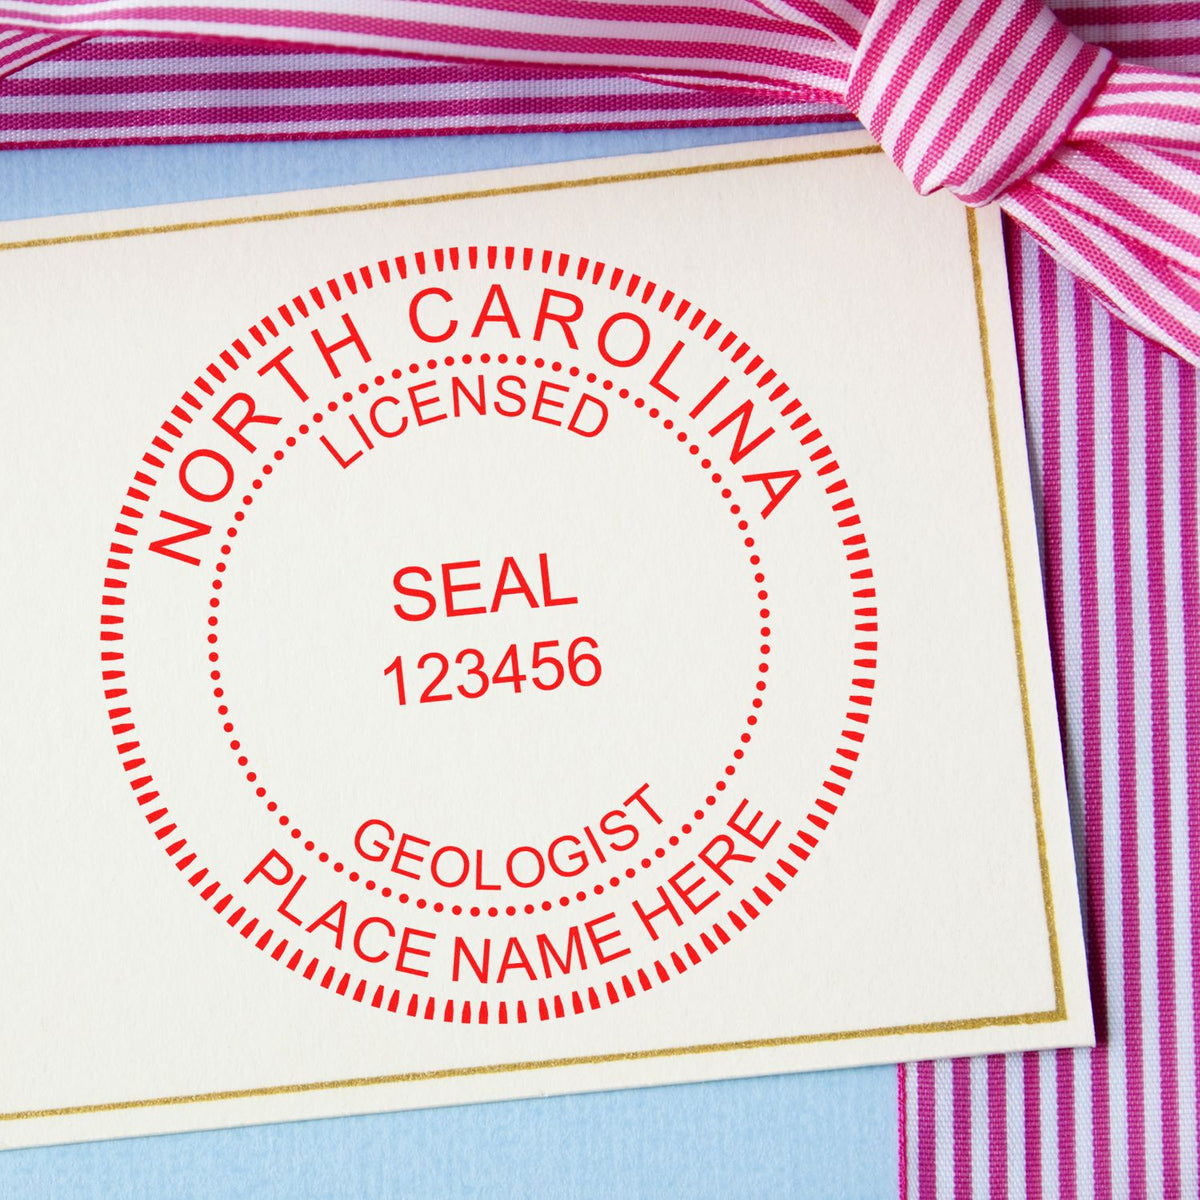 An in use photo of the North Carolina Professional Geologist Seal Stamp showing a sample imprint on a cardstock